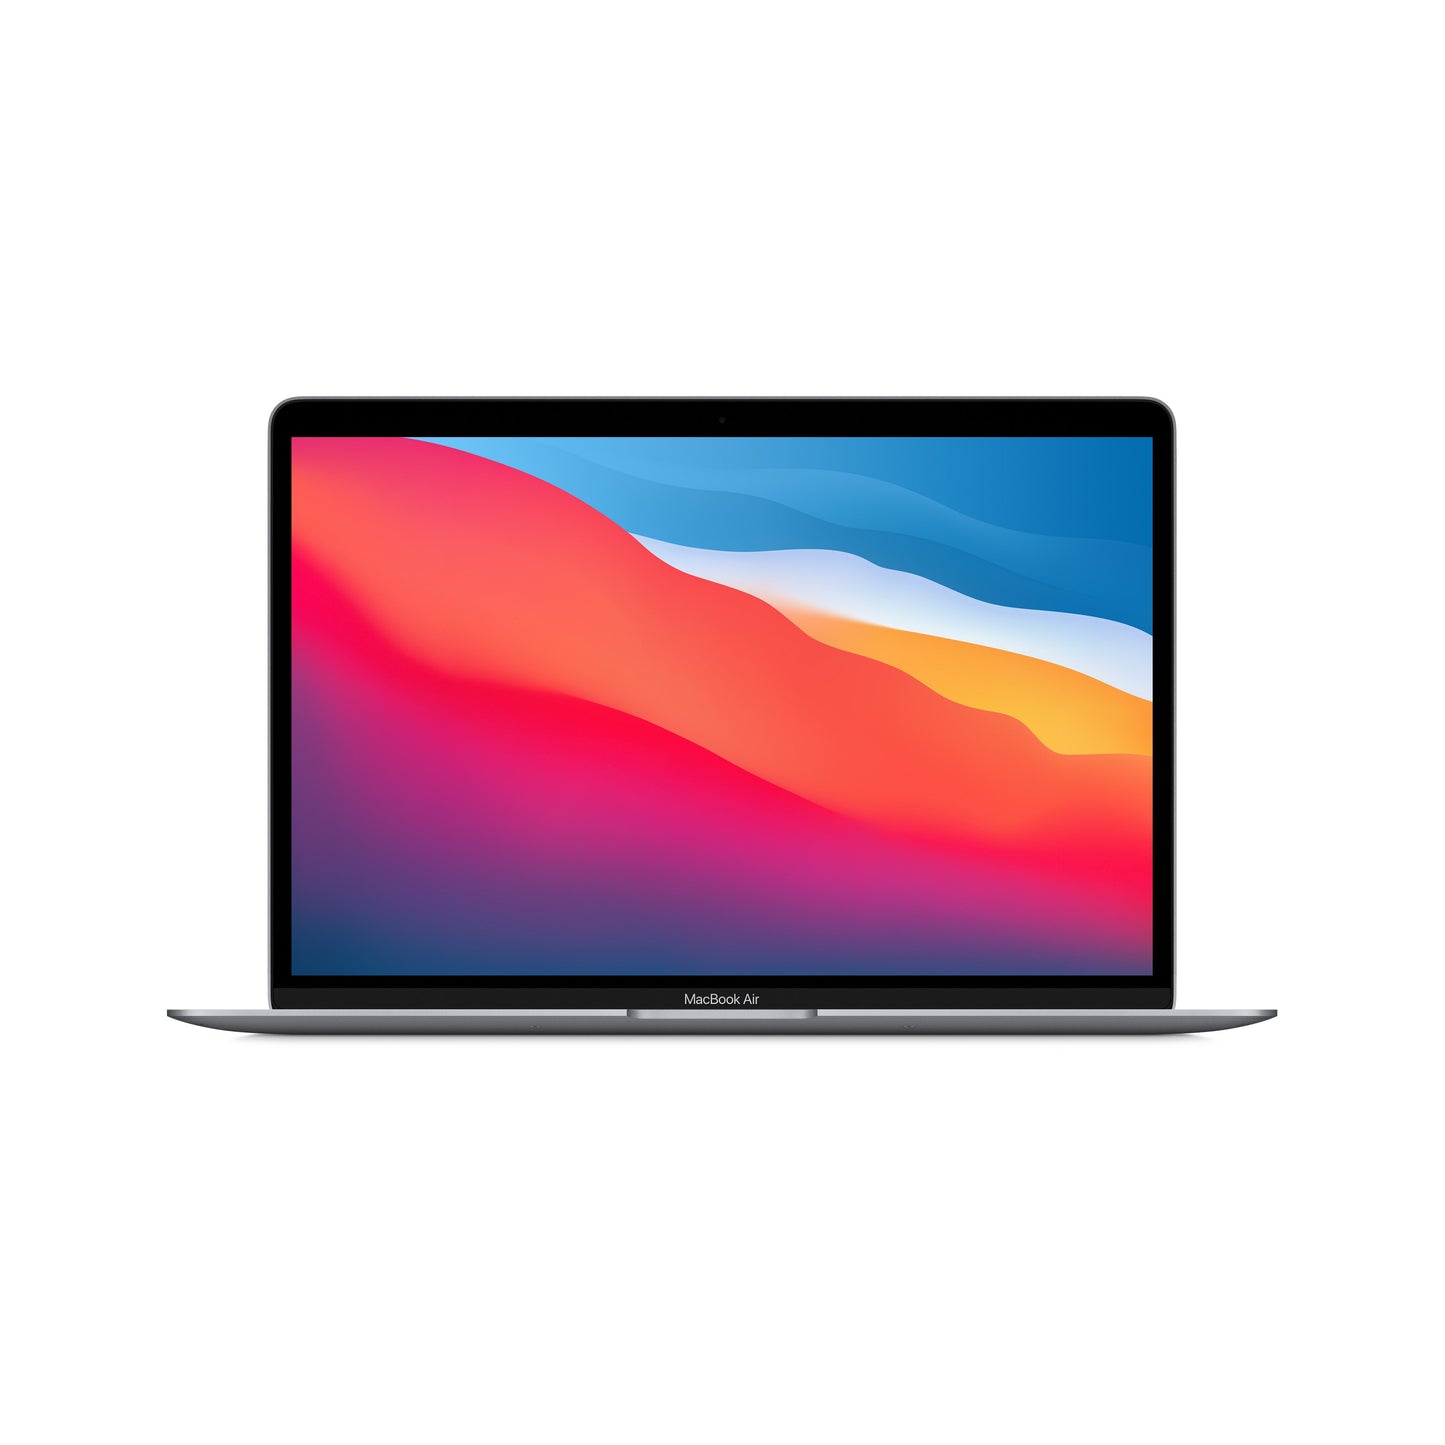 13-inch MacBook Air: Apple M1 chip with 8-core CPU and 7-core GPU, 256GB - Space Grey - US English Keyboard